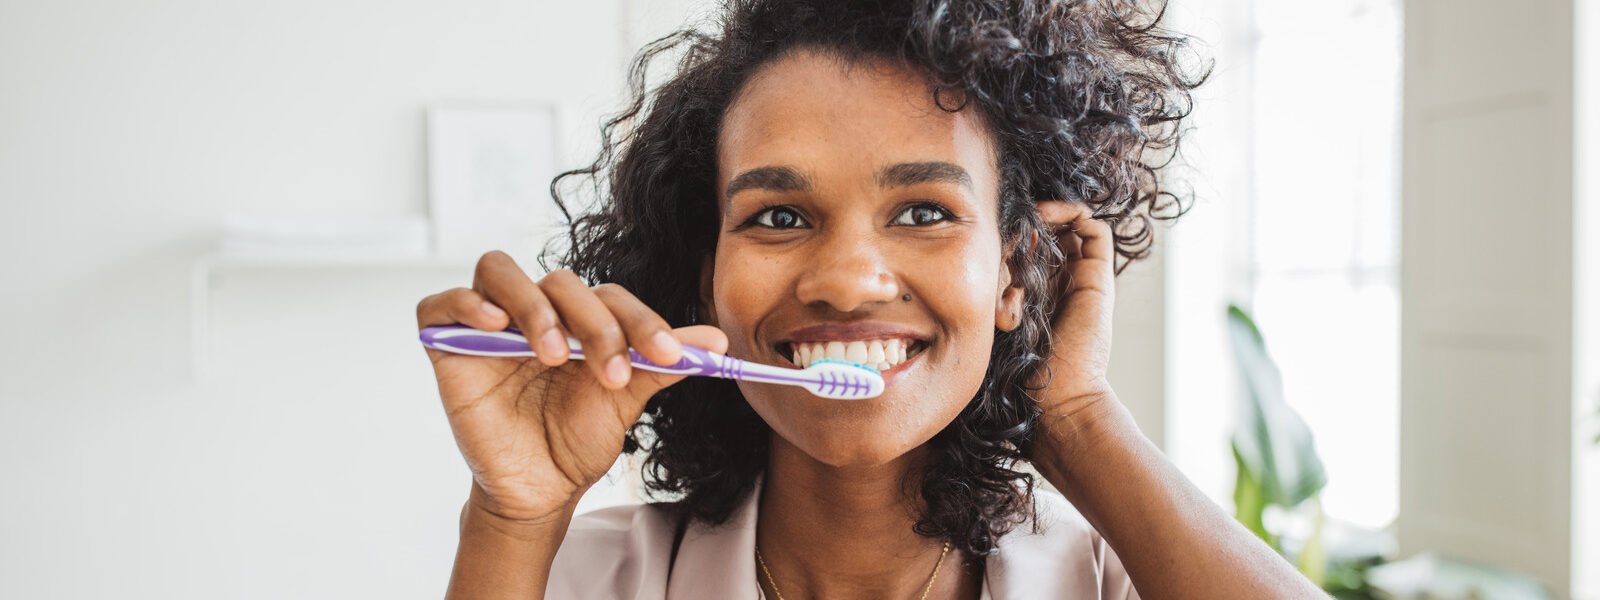 The Easy Core Exercise You Can Do While Brushing Your Teeth - Health Digest